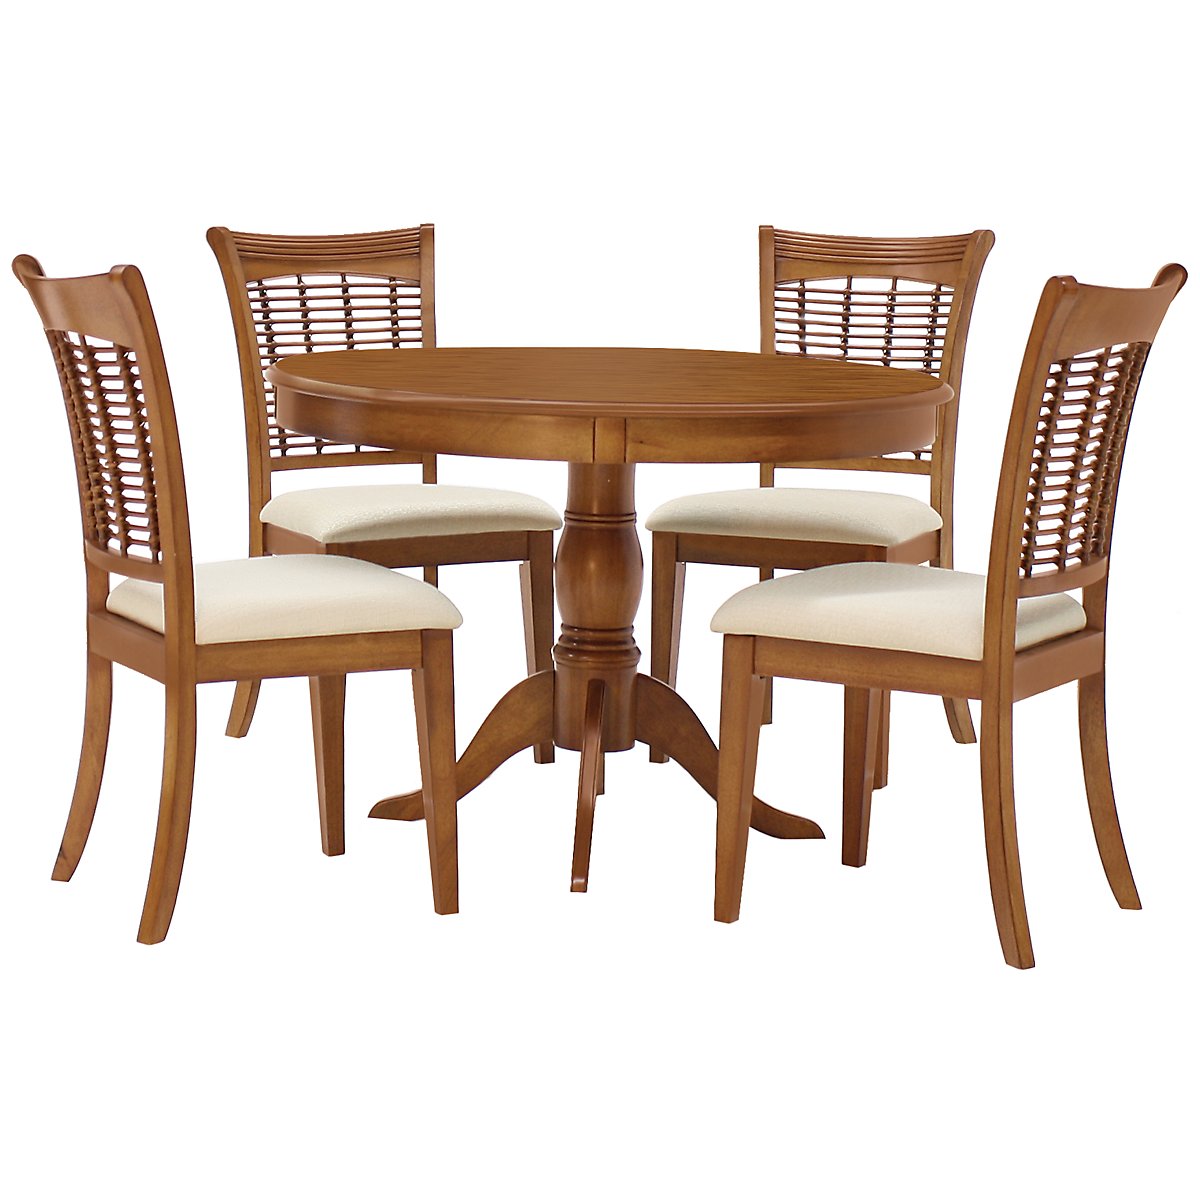 Bayberry Mid Tone Table 4 Chairs Dining Room Dining Sets